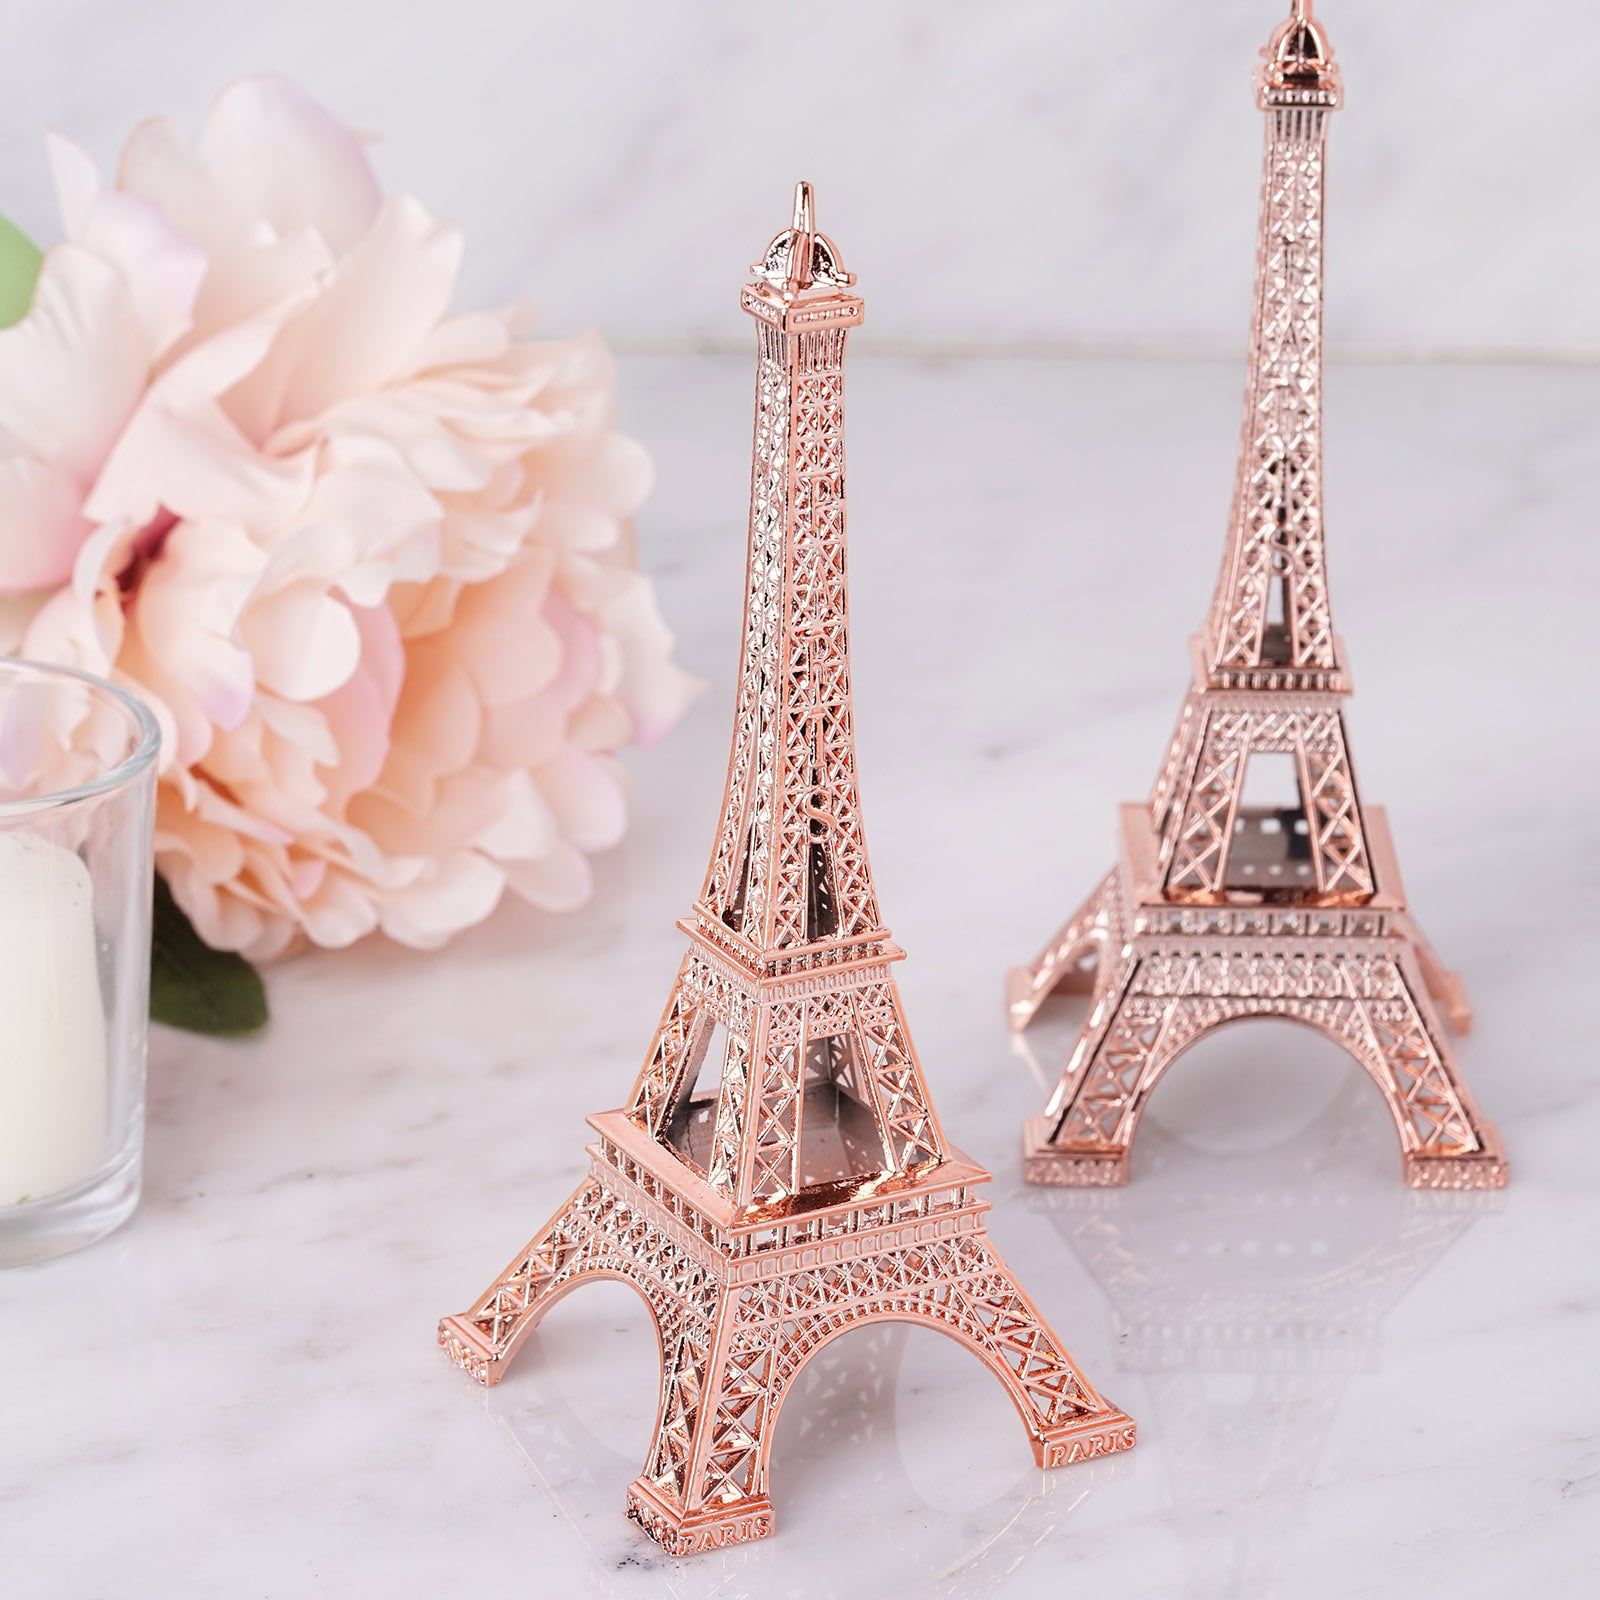 10" ROSE GOLD Eiffel Tower CENTERPIECE Wedding Party Wholesale Supply SALE 